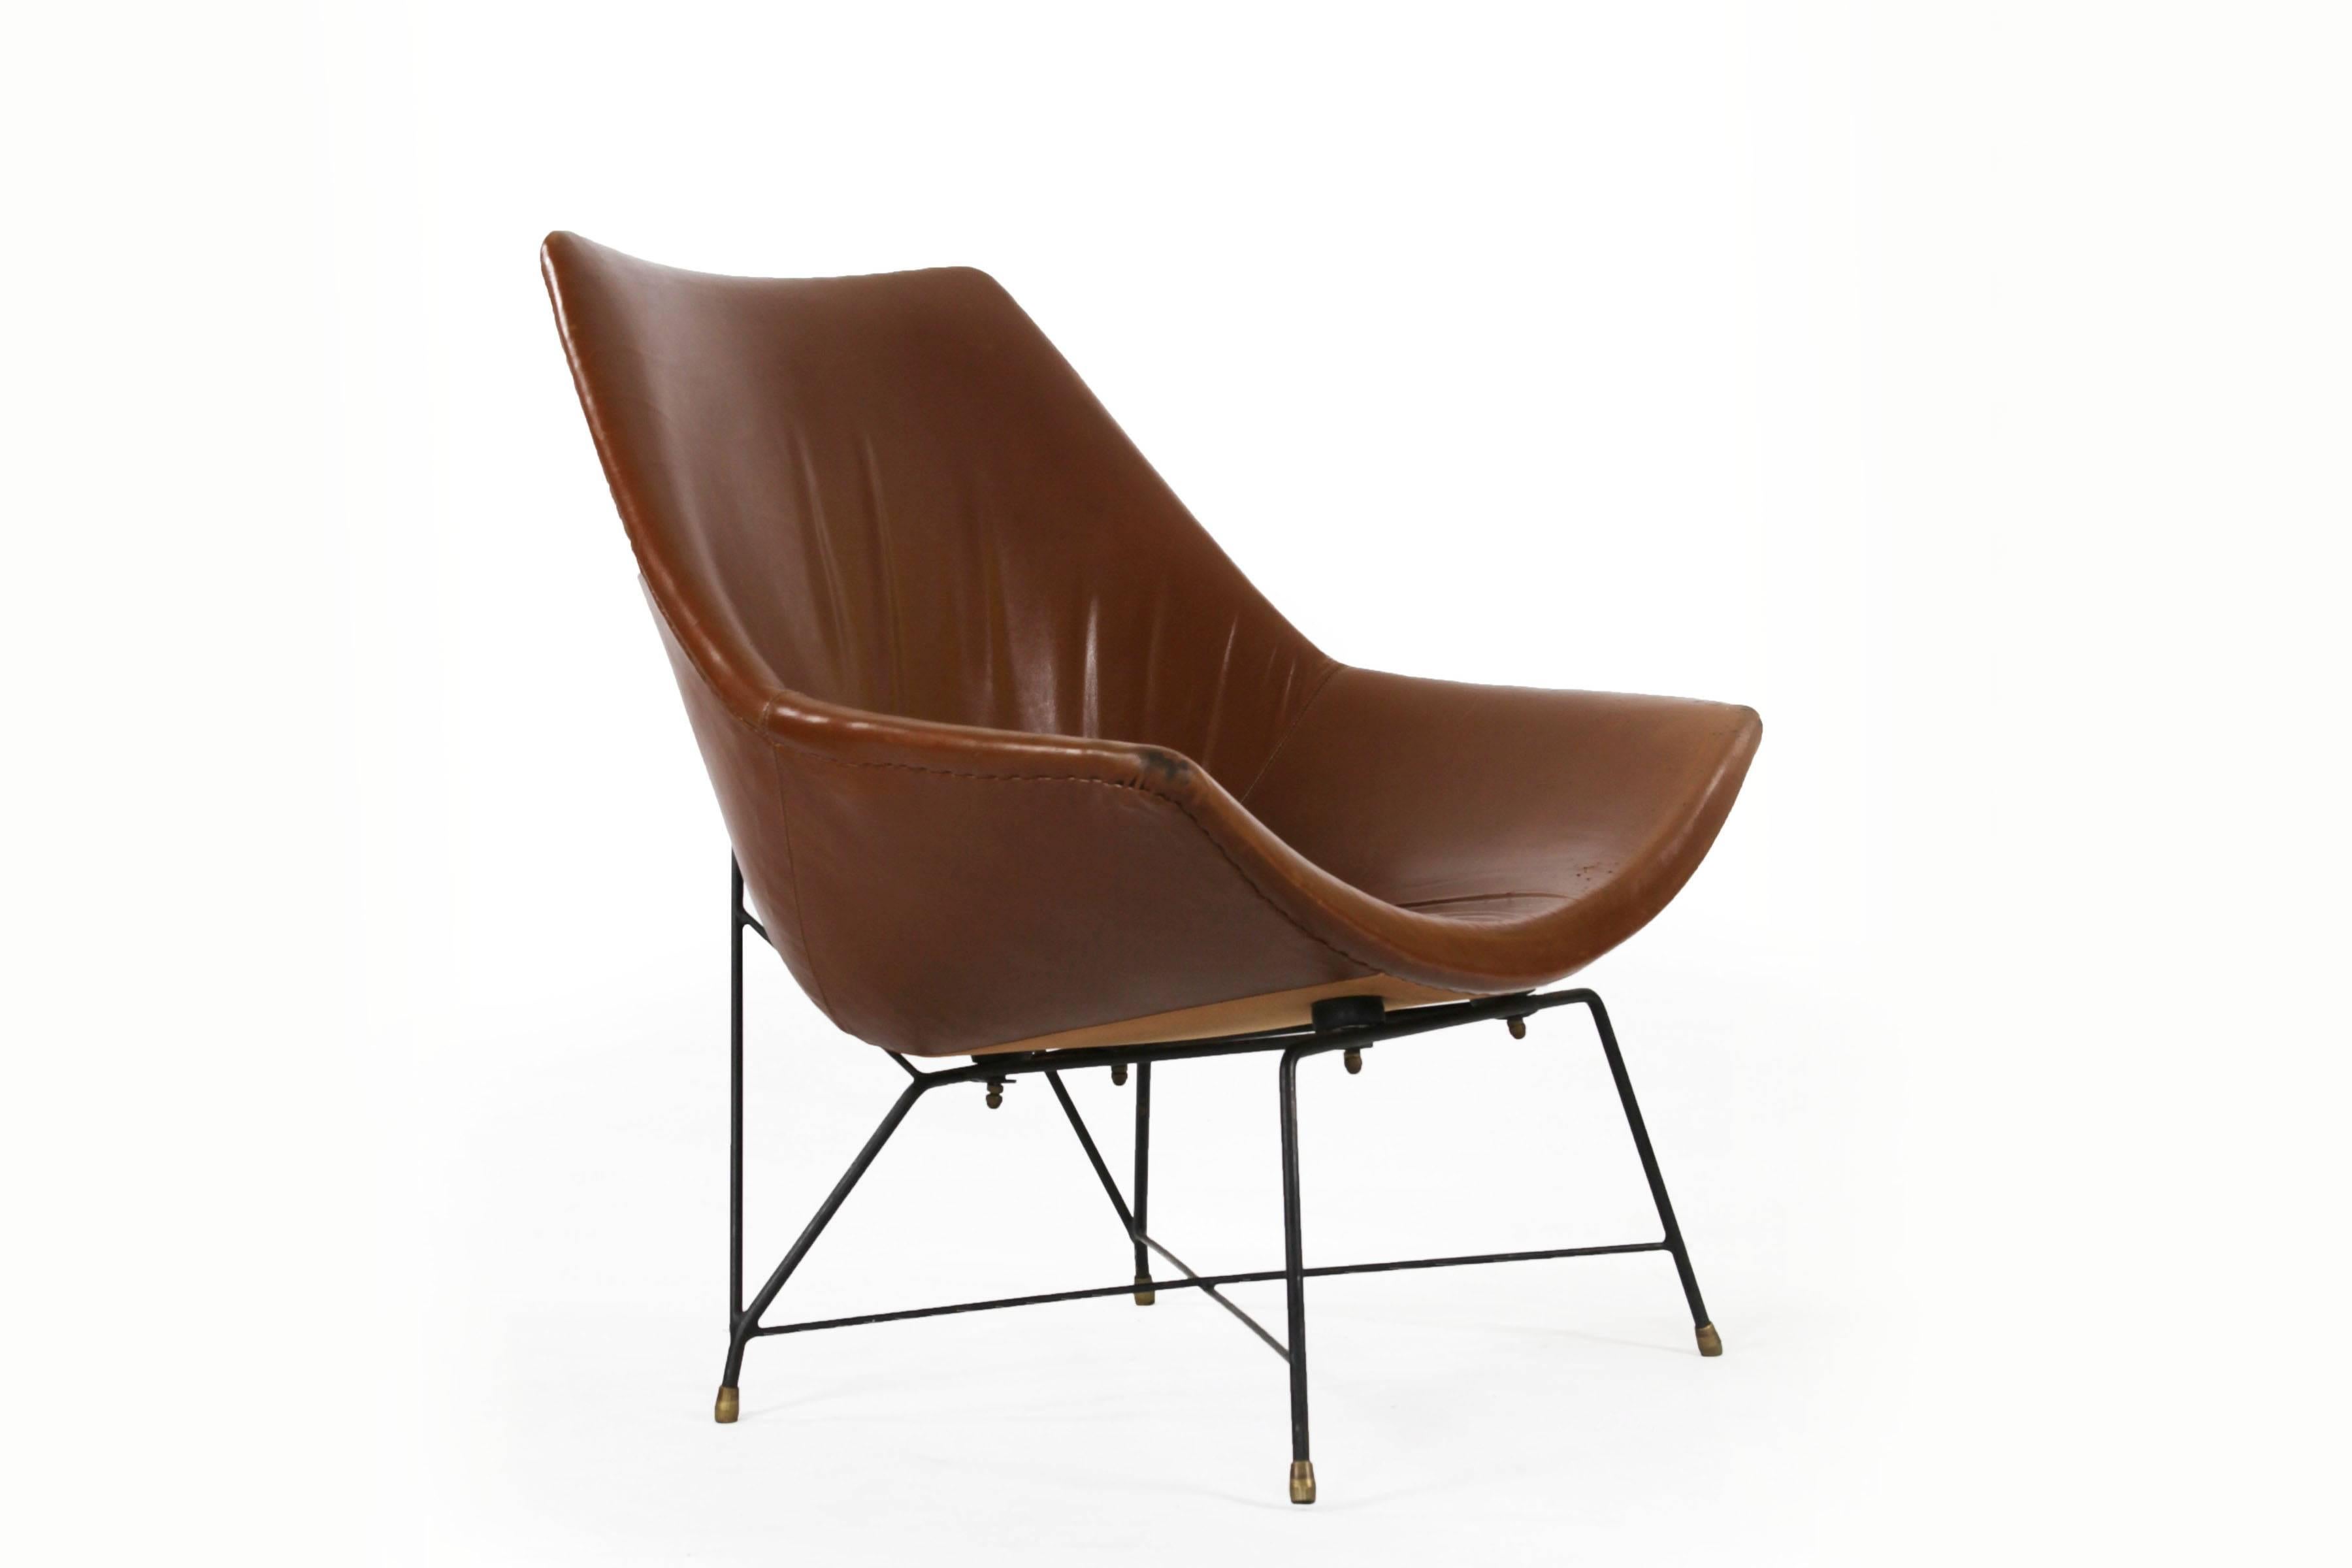 Mid-Century Modern Italian Brown Leather Kosmos Chair Design by Augusto Bozzi for Saporiti, 1954 For Sale